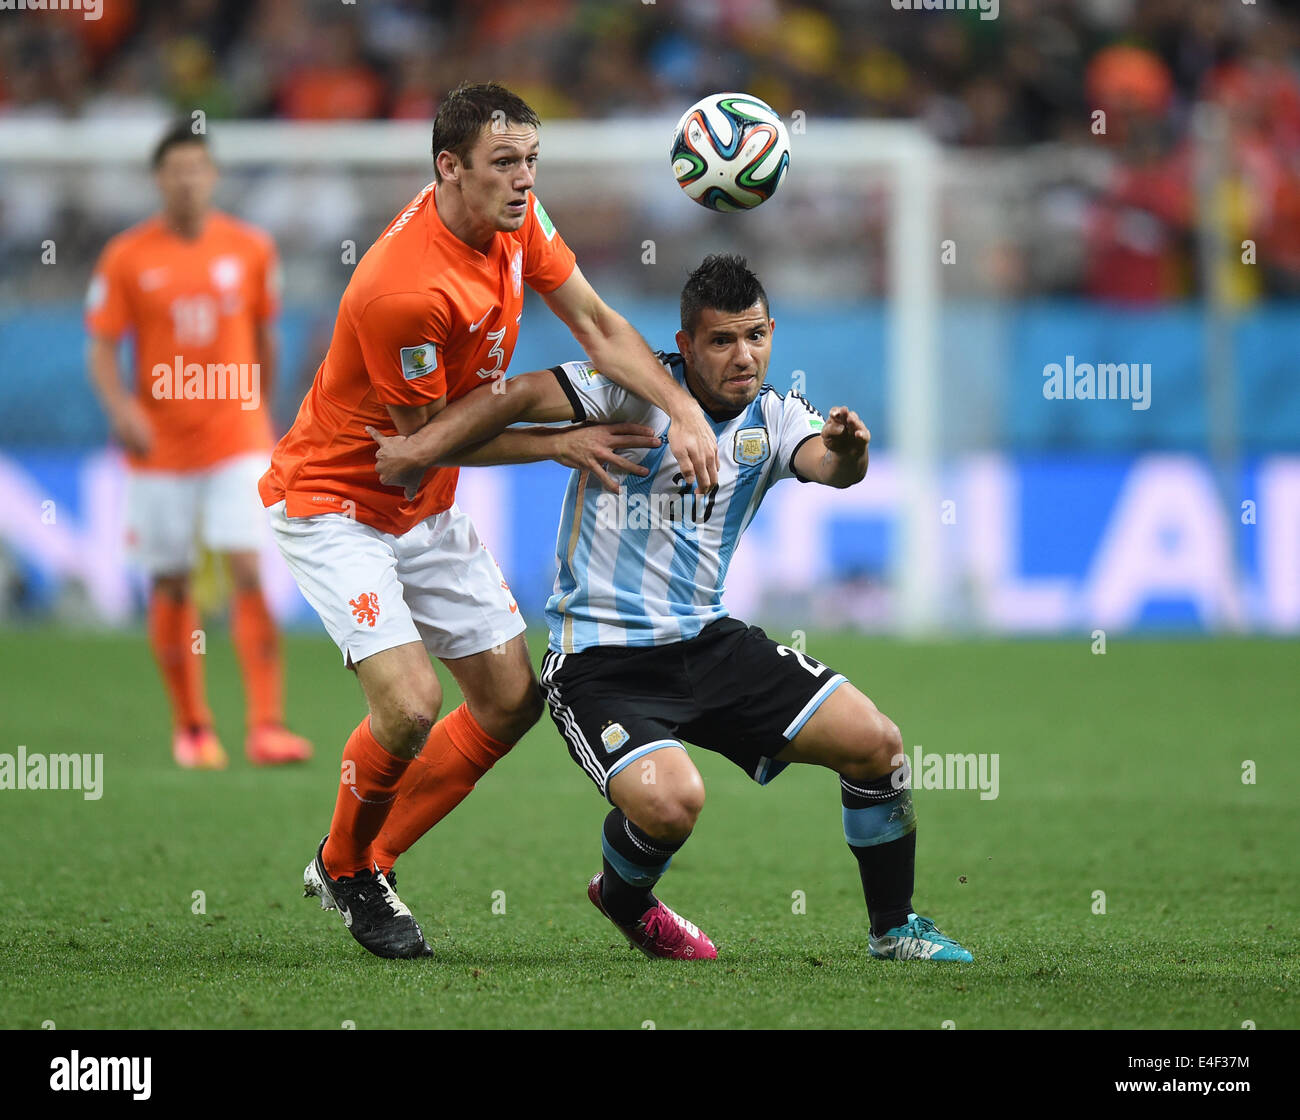 Sao Paulo, Brazil. 09th July, 2014. Sergio Aguero (R) of Argentina and Stefan de Vrij of the Netherlands vie for the ball during the FIFA World Cup 2014 semi-final soccer match between the Netherlands and Argentina at the Arena Corinthians in Sao Paulo, Brazil, 09 July 2014. Photo: Marius Becker/dpa/Alamy Live News Stock Photo